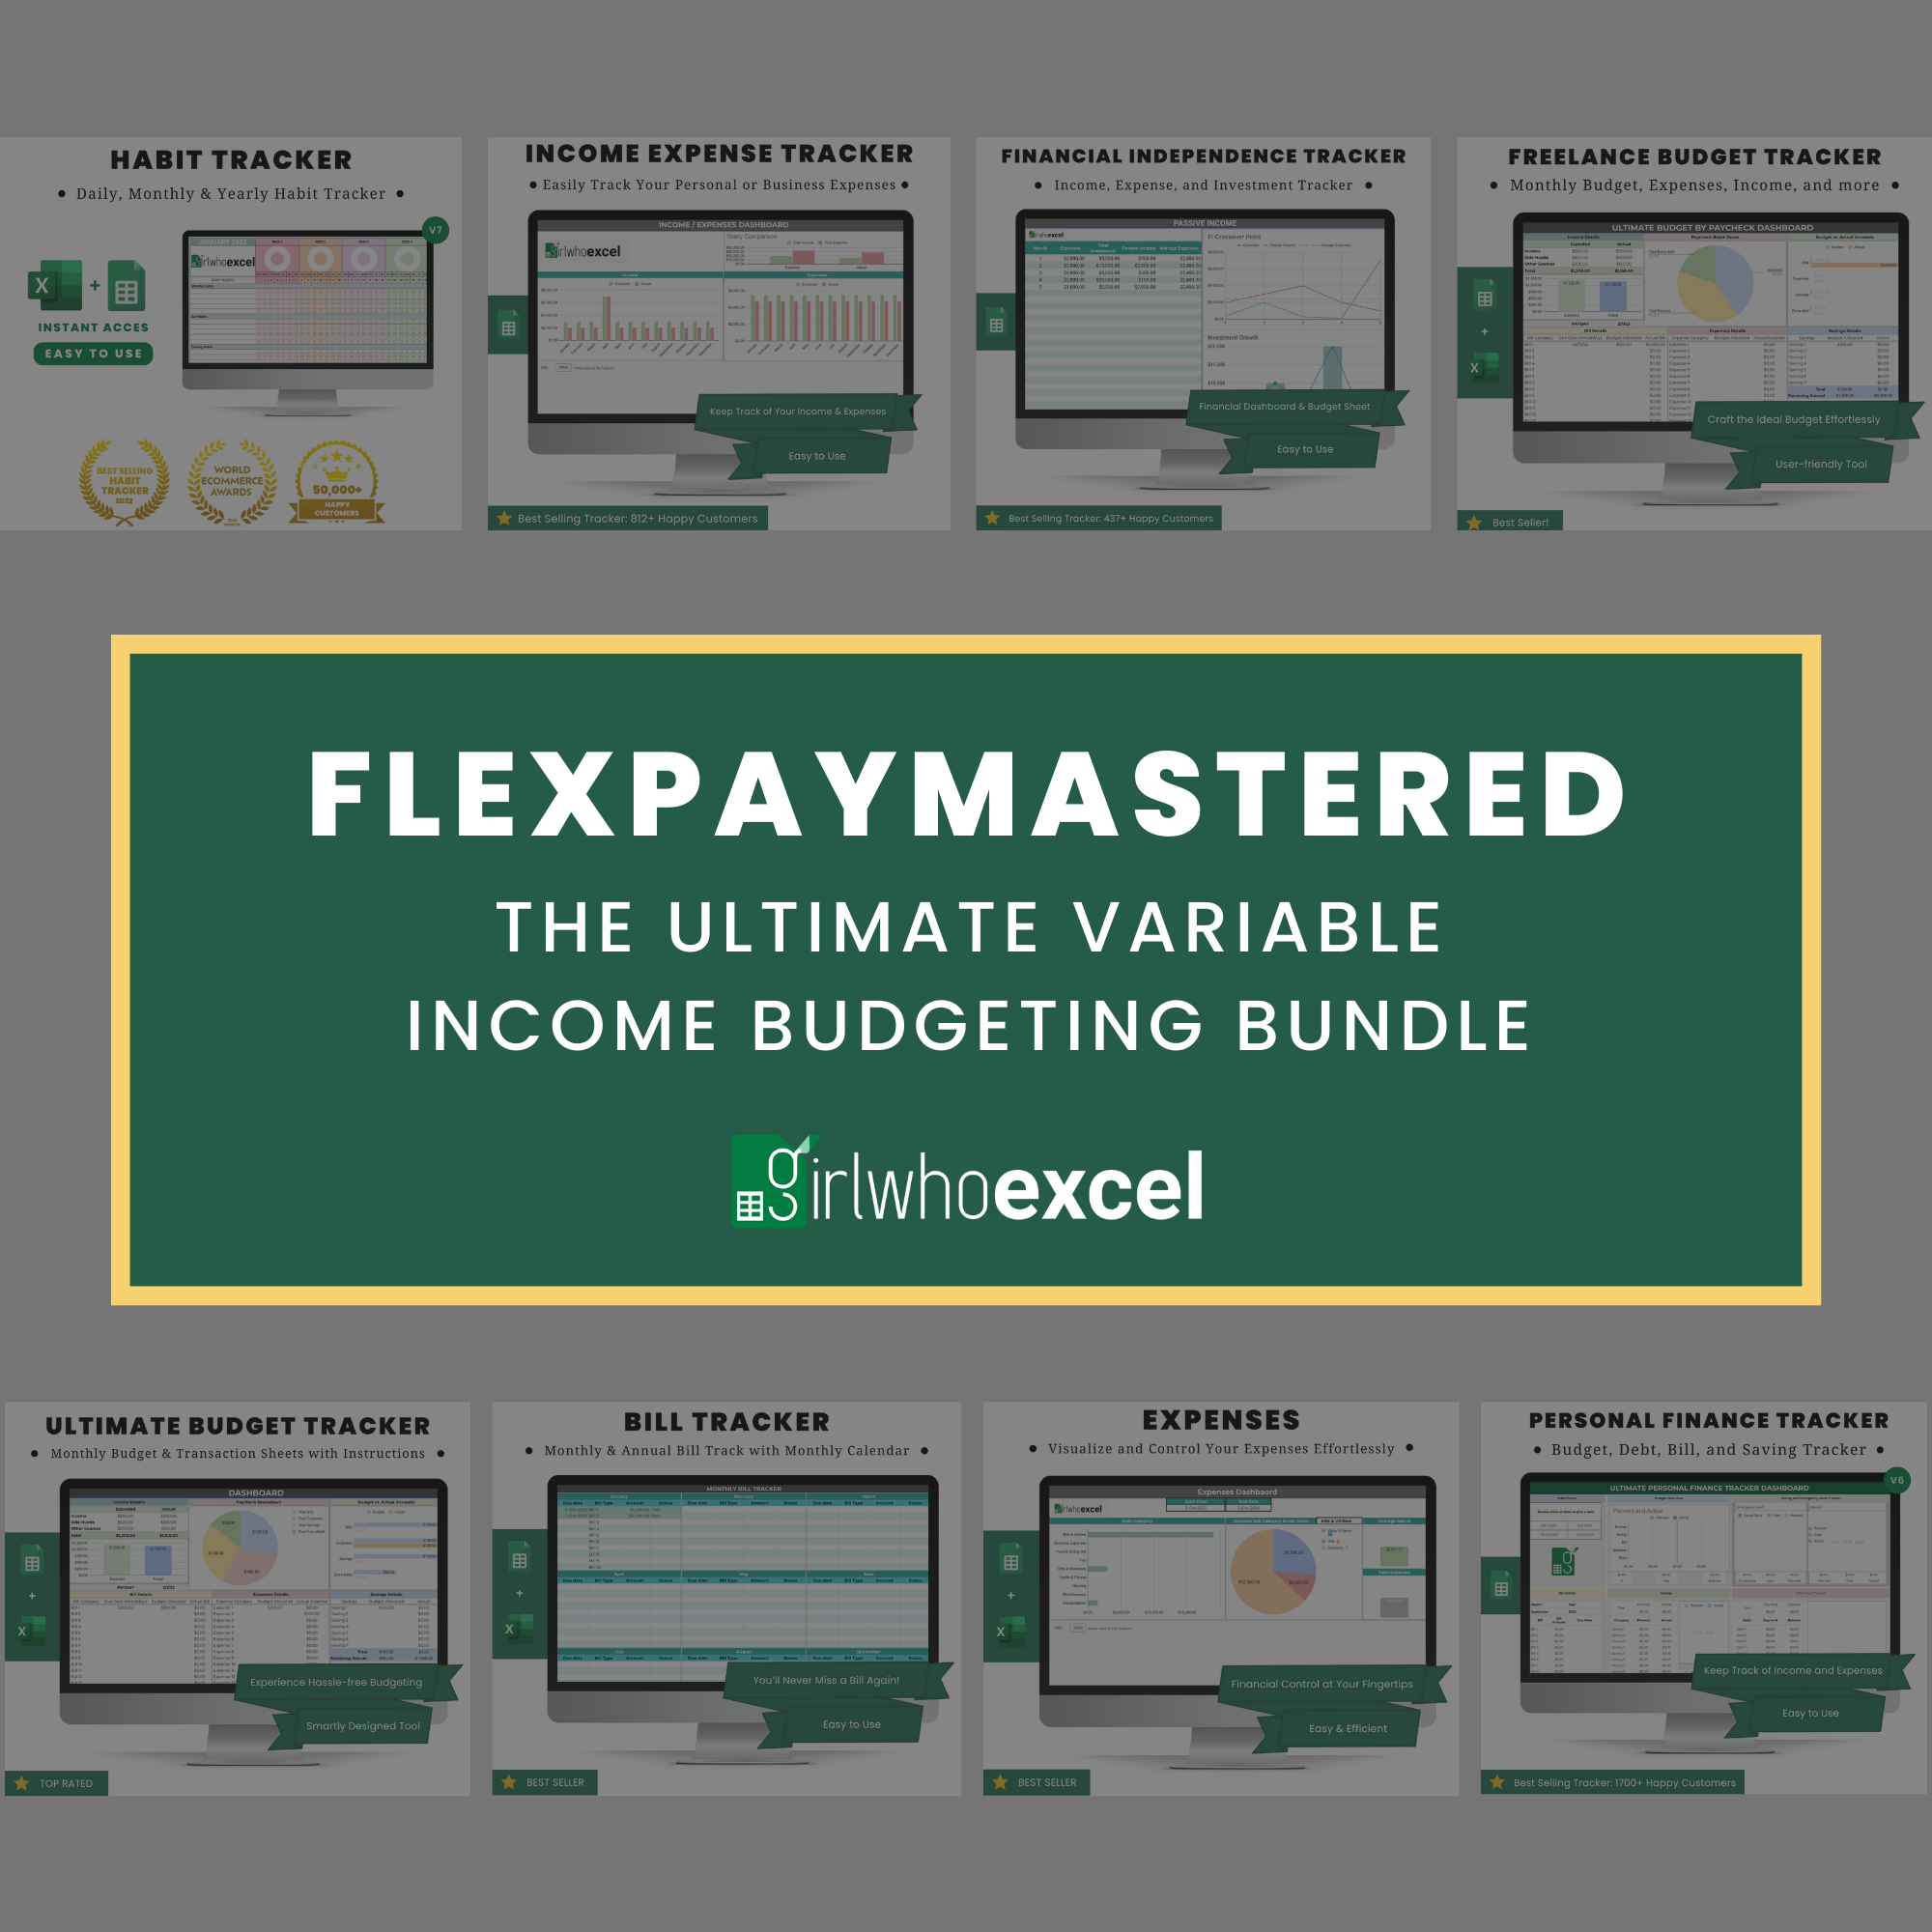 FlexPayMastered: The Ultimate Variable Income Budgeting Bundle